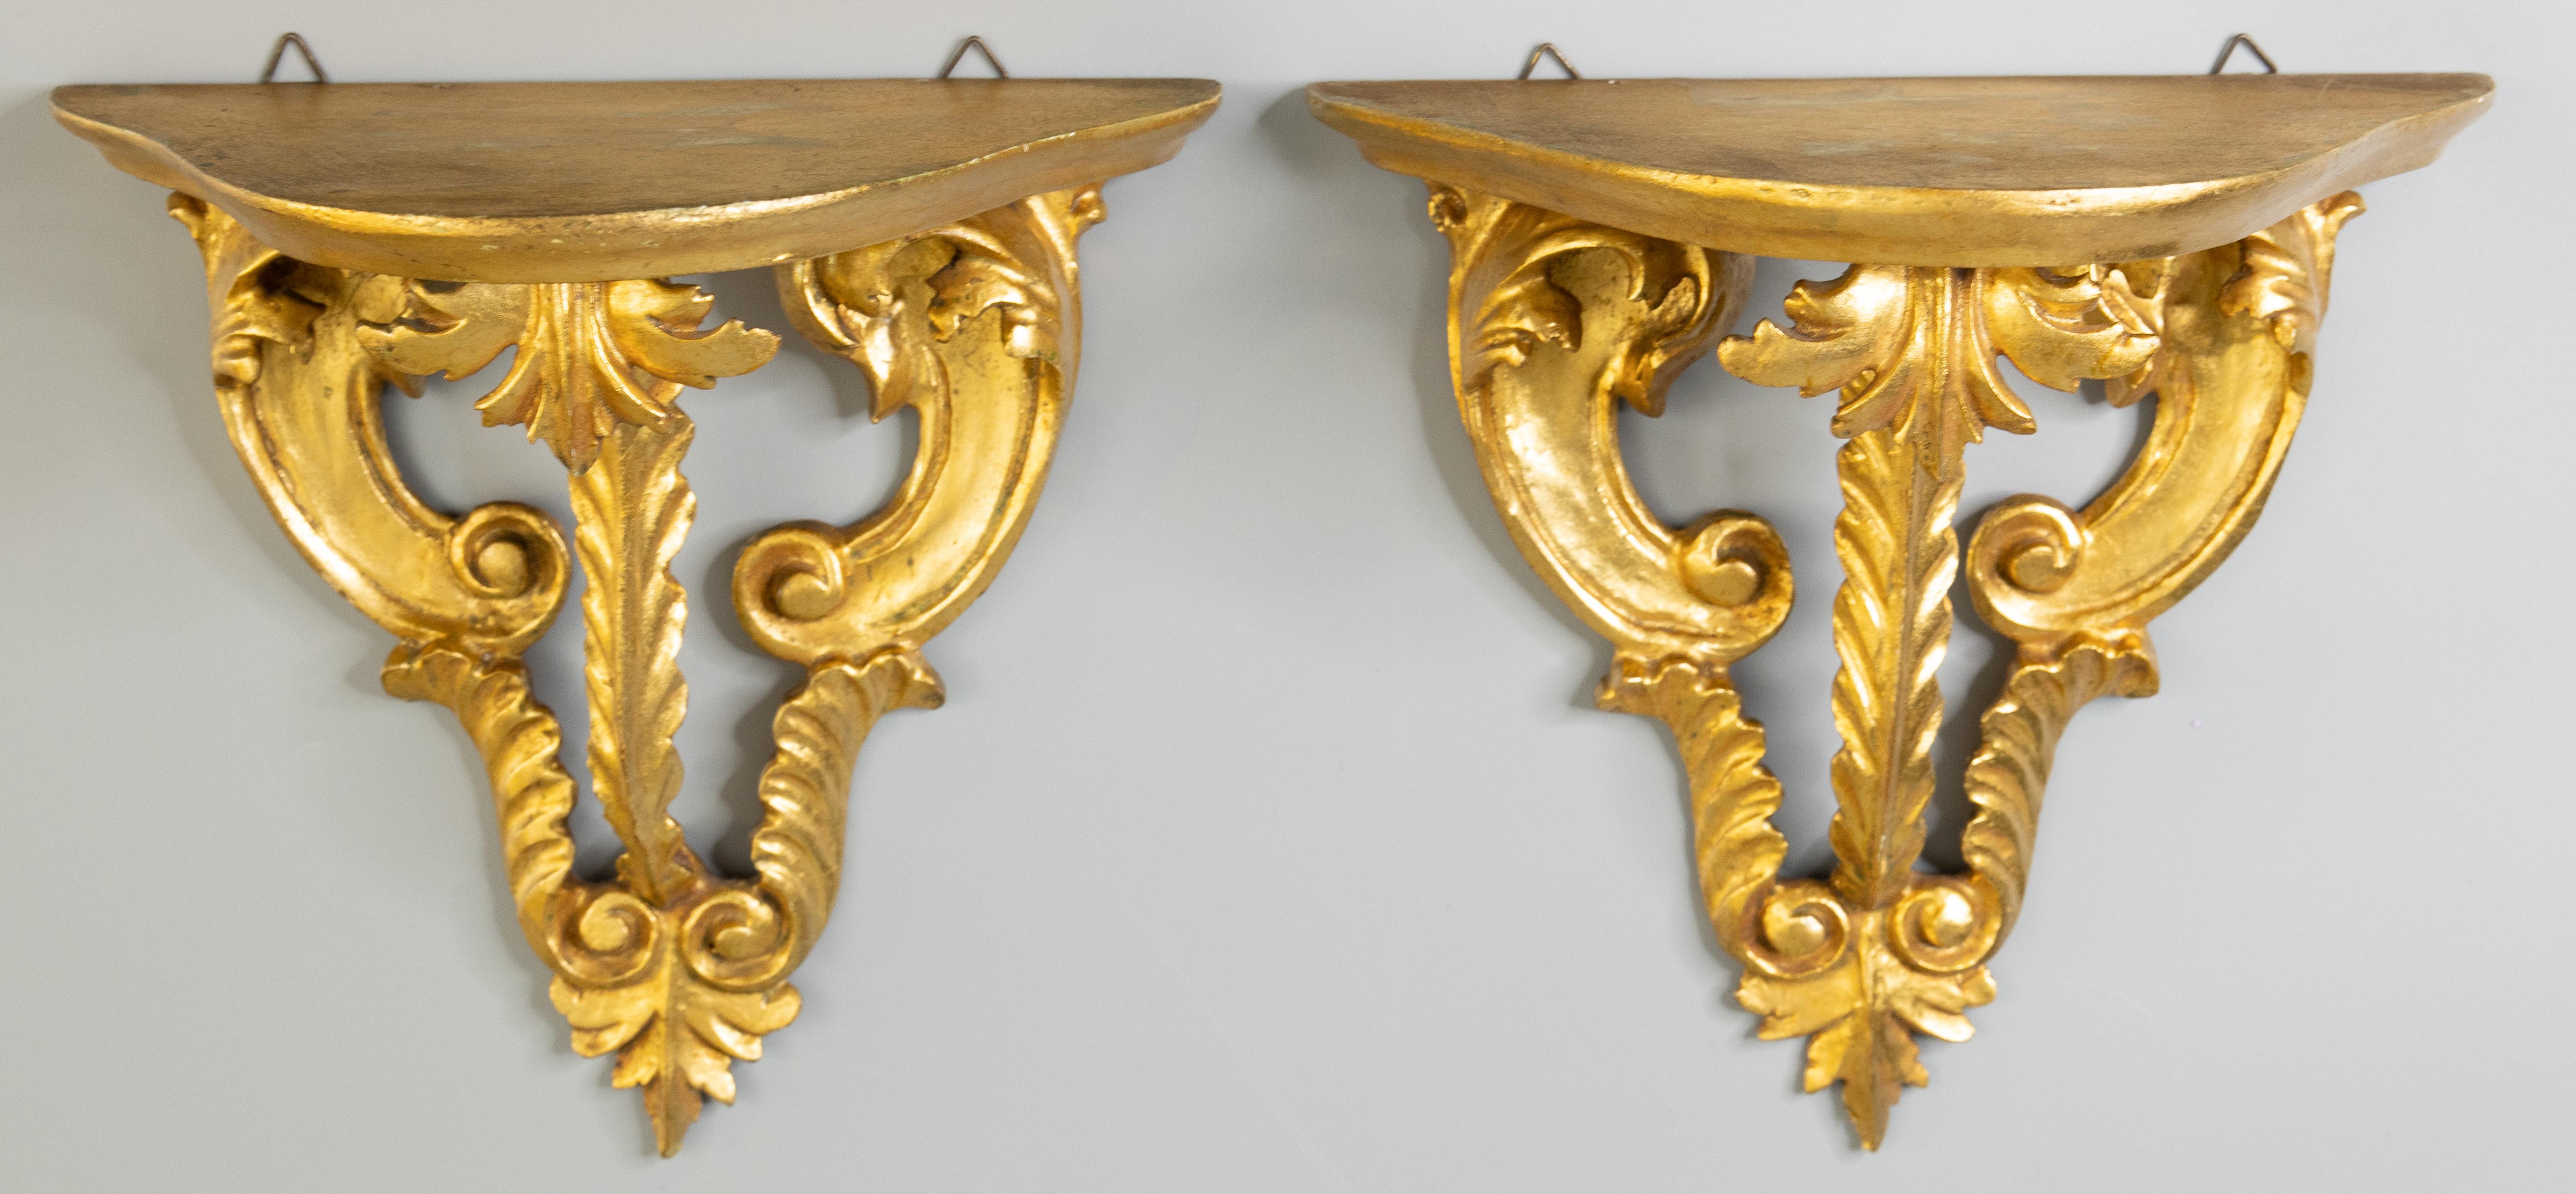 A lovely pair of vintage Italian gilded wood wall brackets or shelves from Florence, Italy, circa 1950. These stylish brackets have a hand carved scrolling acanthus leaf design and beautiful gilt patina. They are perfect for displaying decorative